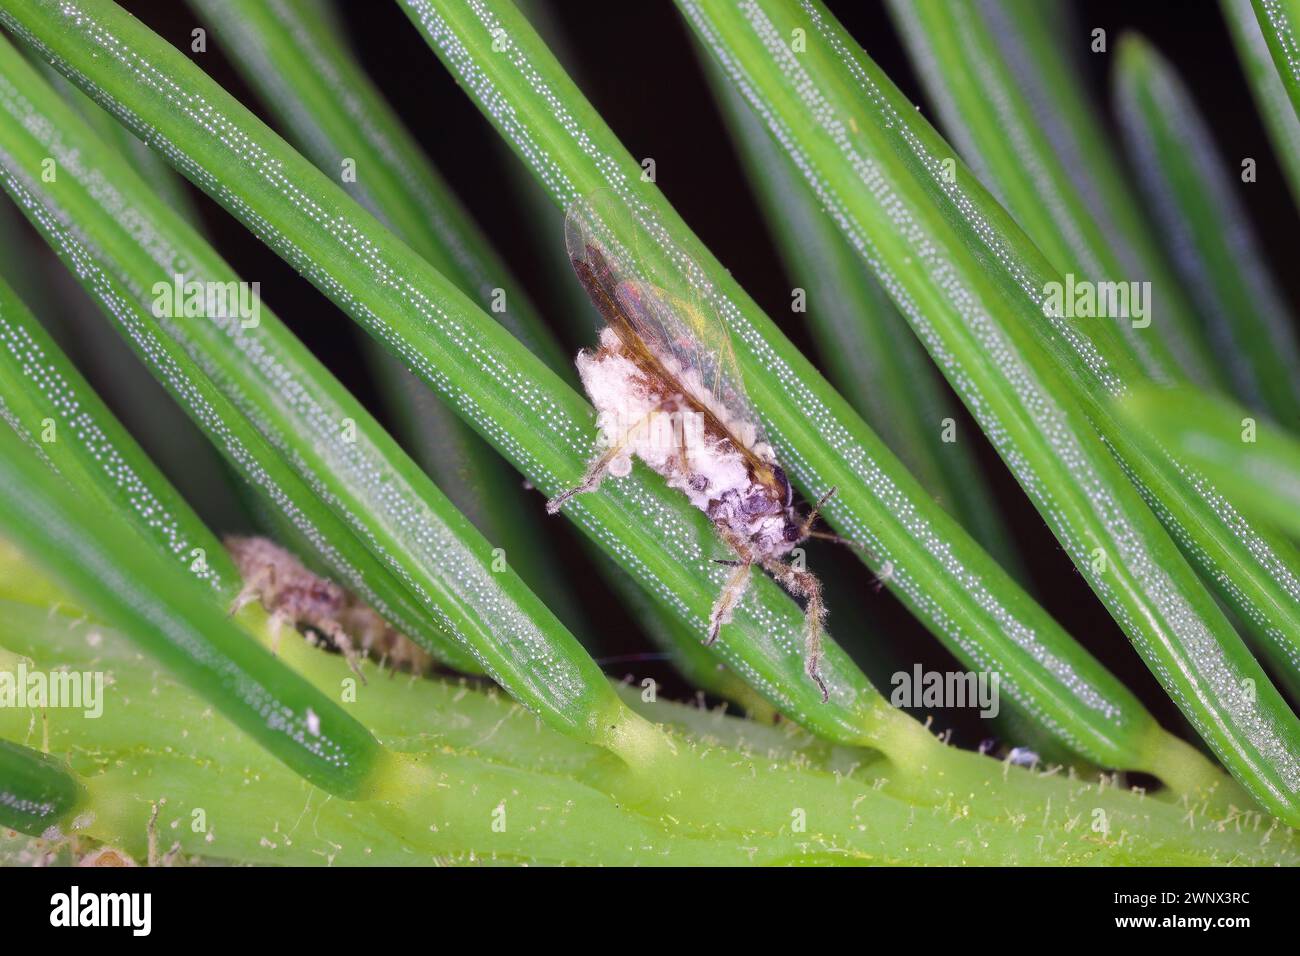 The bark louse also colled Red-brown powdered spruce tree louse (Cinara pilicornis) colonized shoots of tree in garden. A winged adult individual. Stock Photo